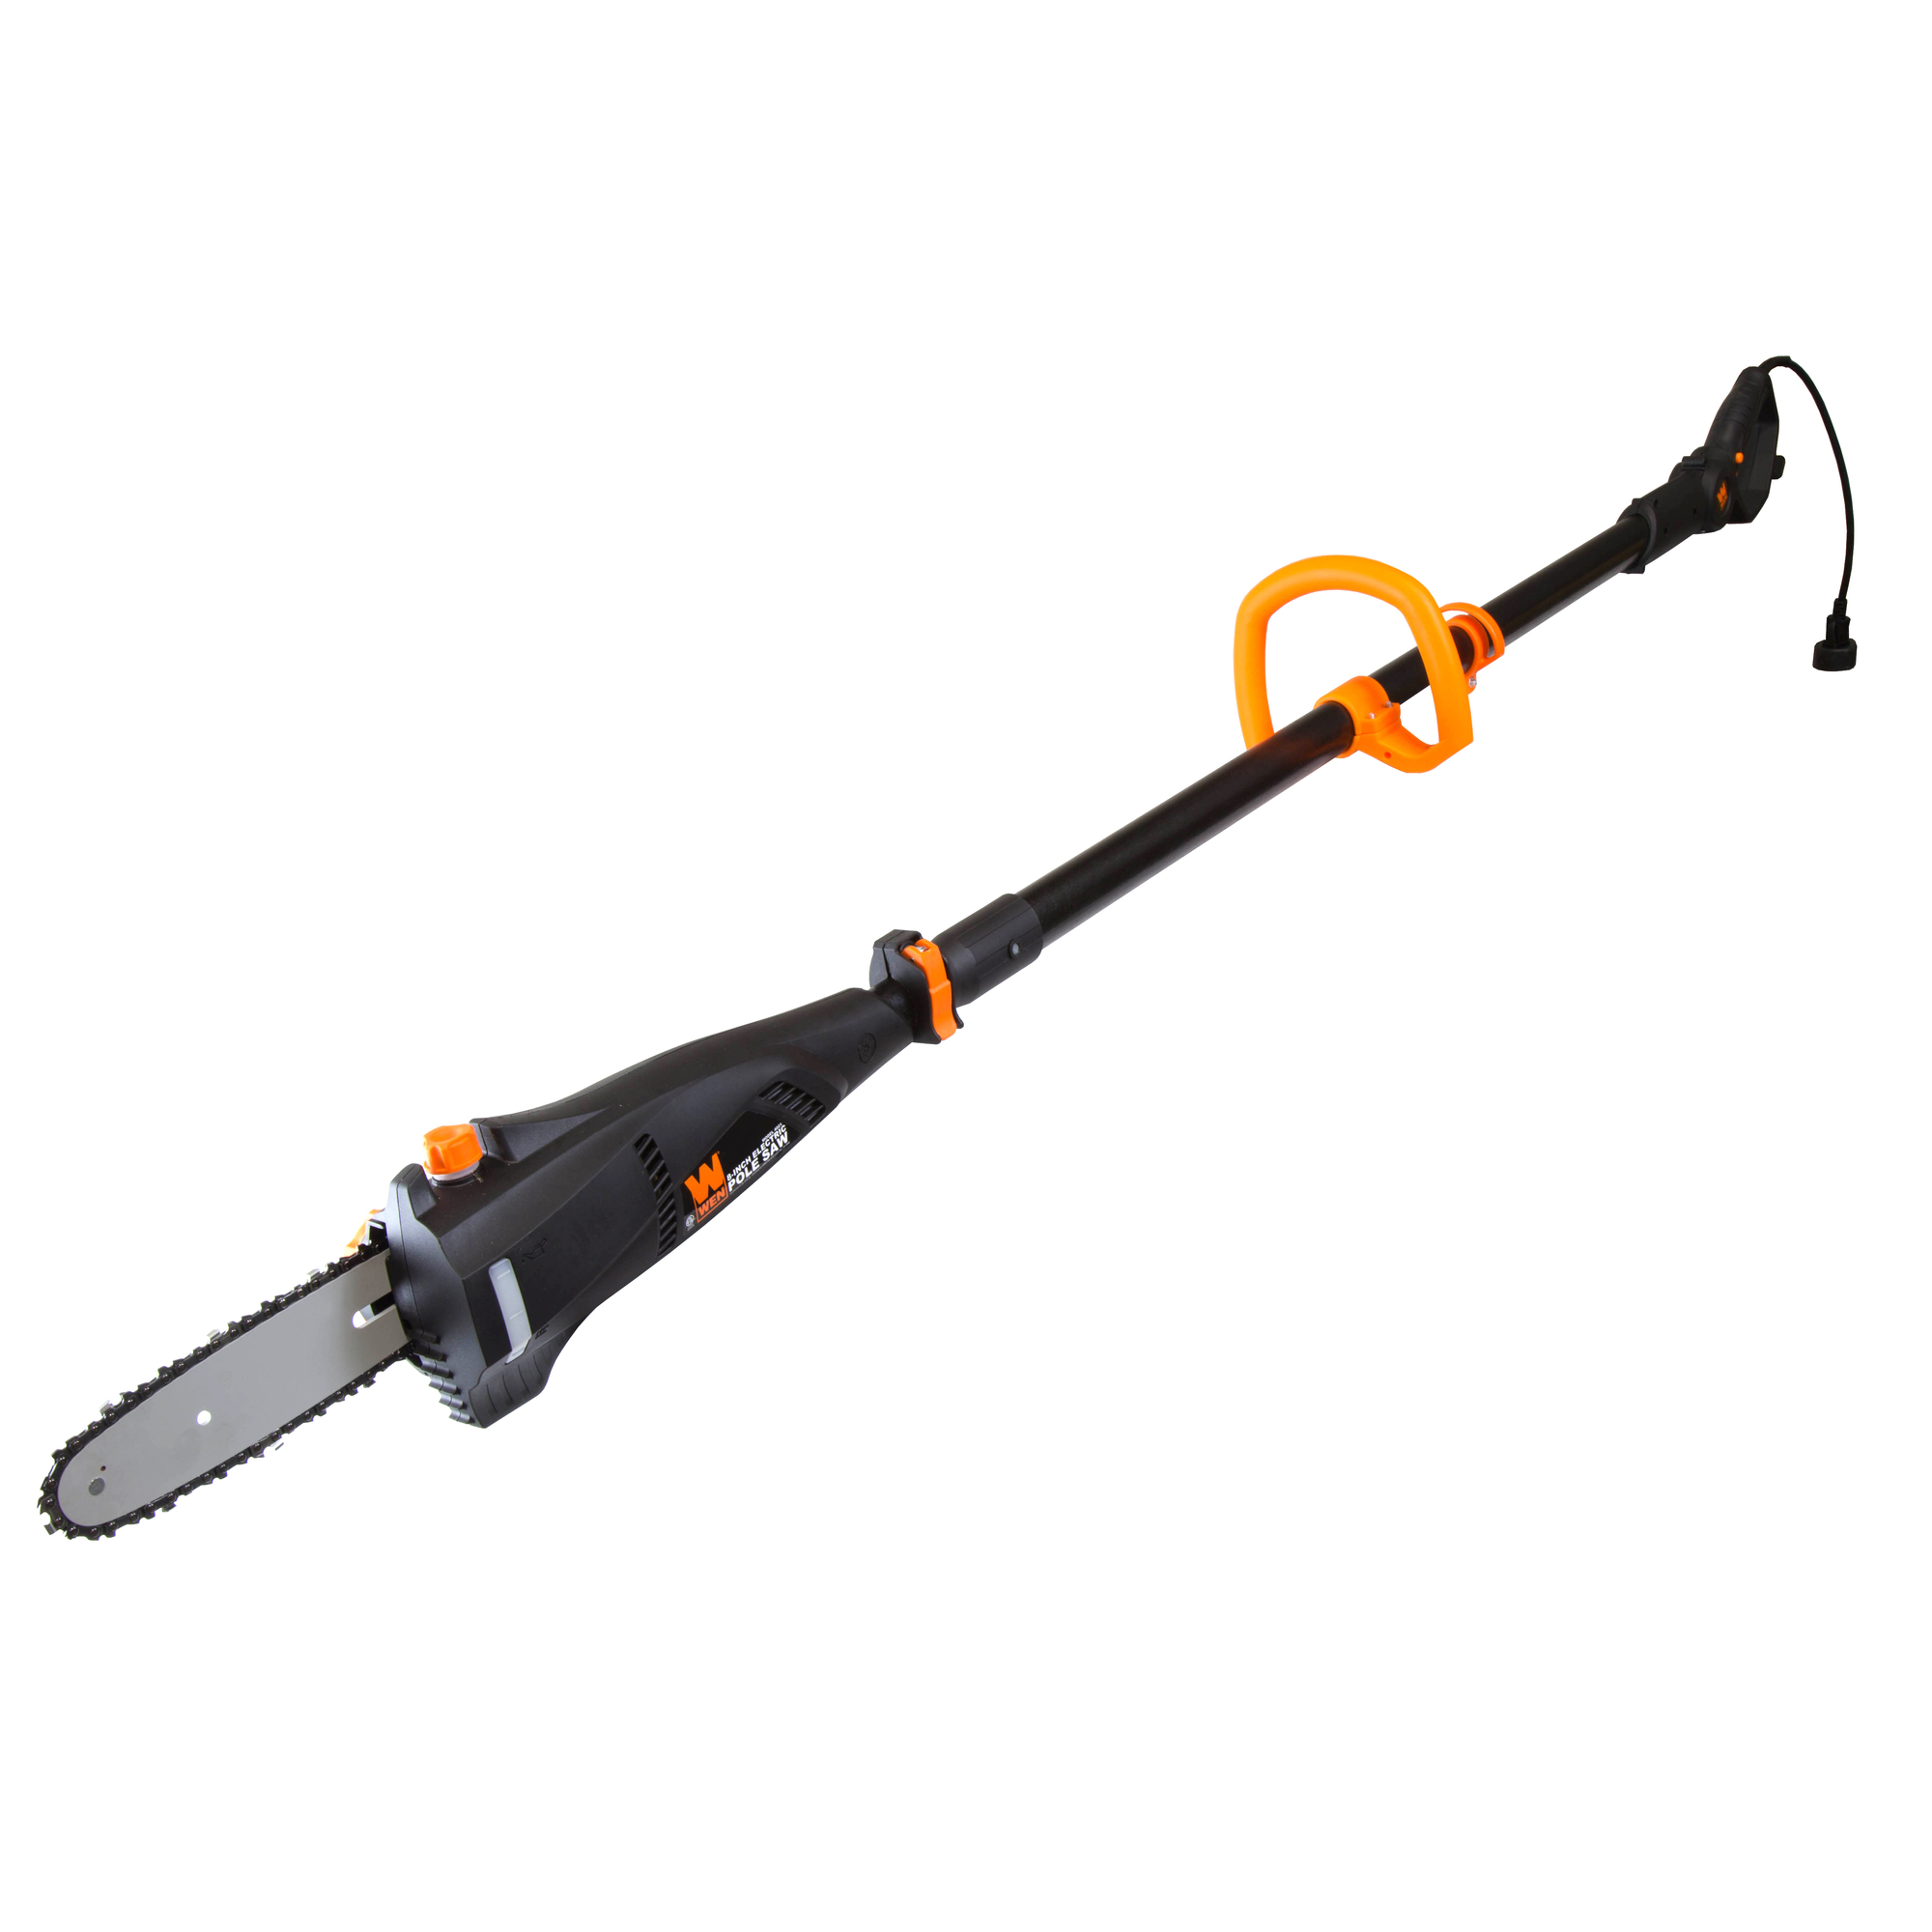 WEN, 8Inch 6.5A Electric Pole Saw, Bar Length 8 in, Operating Height 9.5 ft, Model 4021